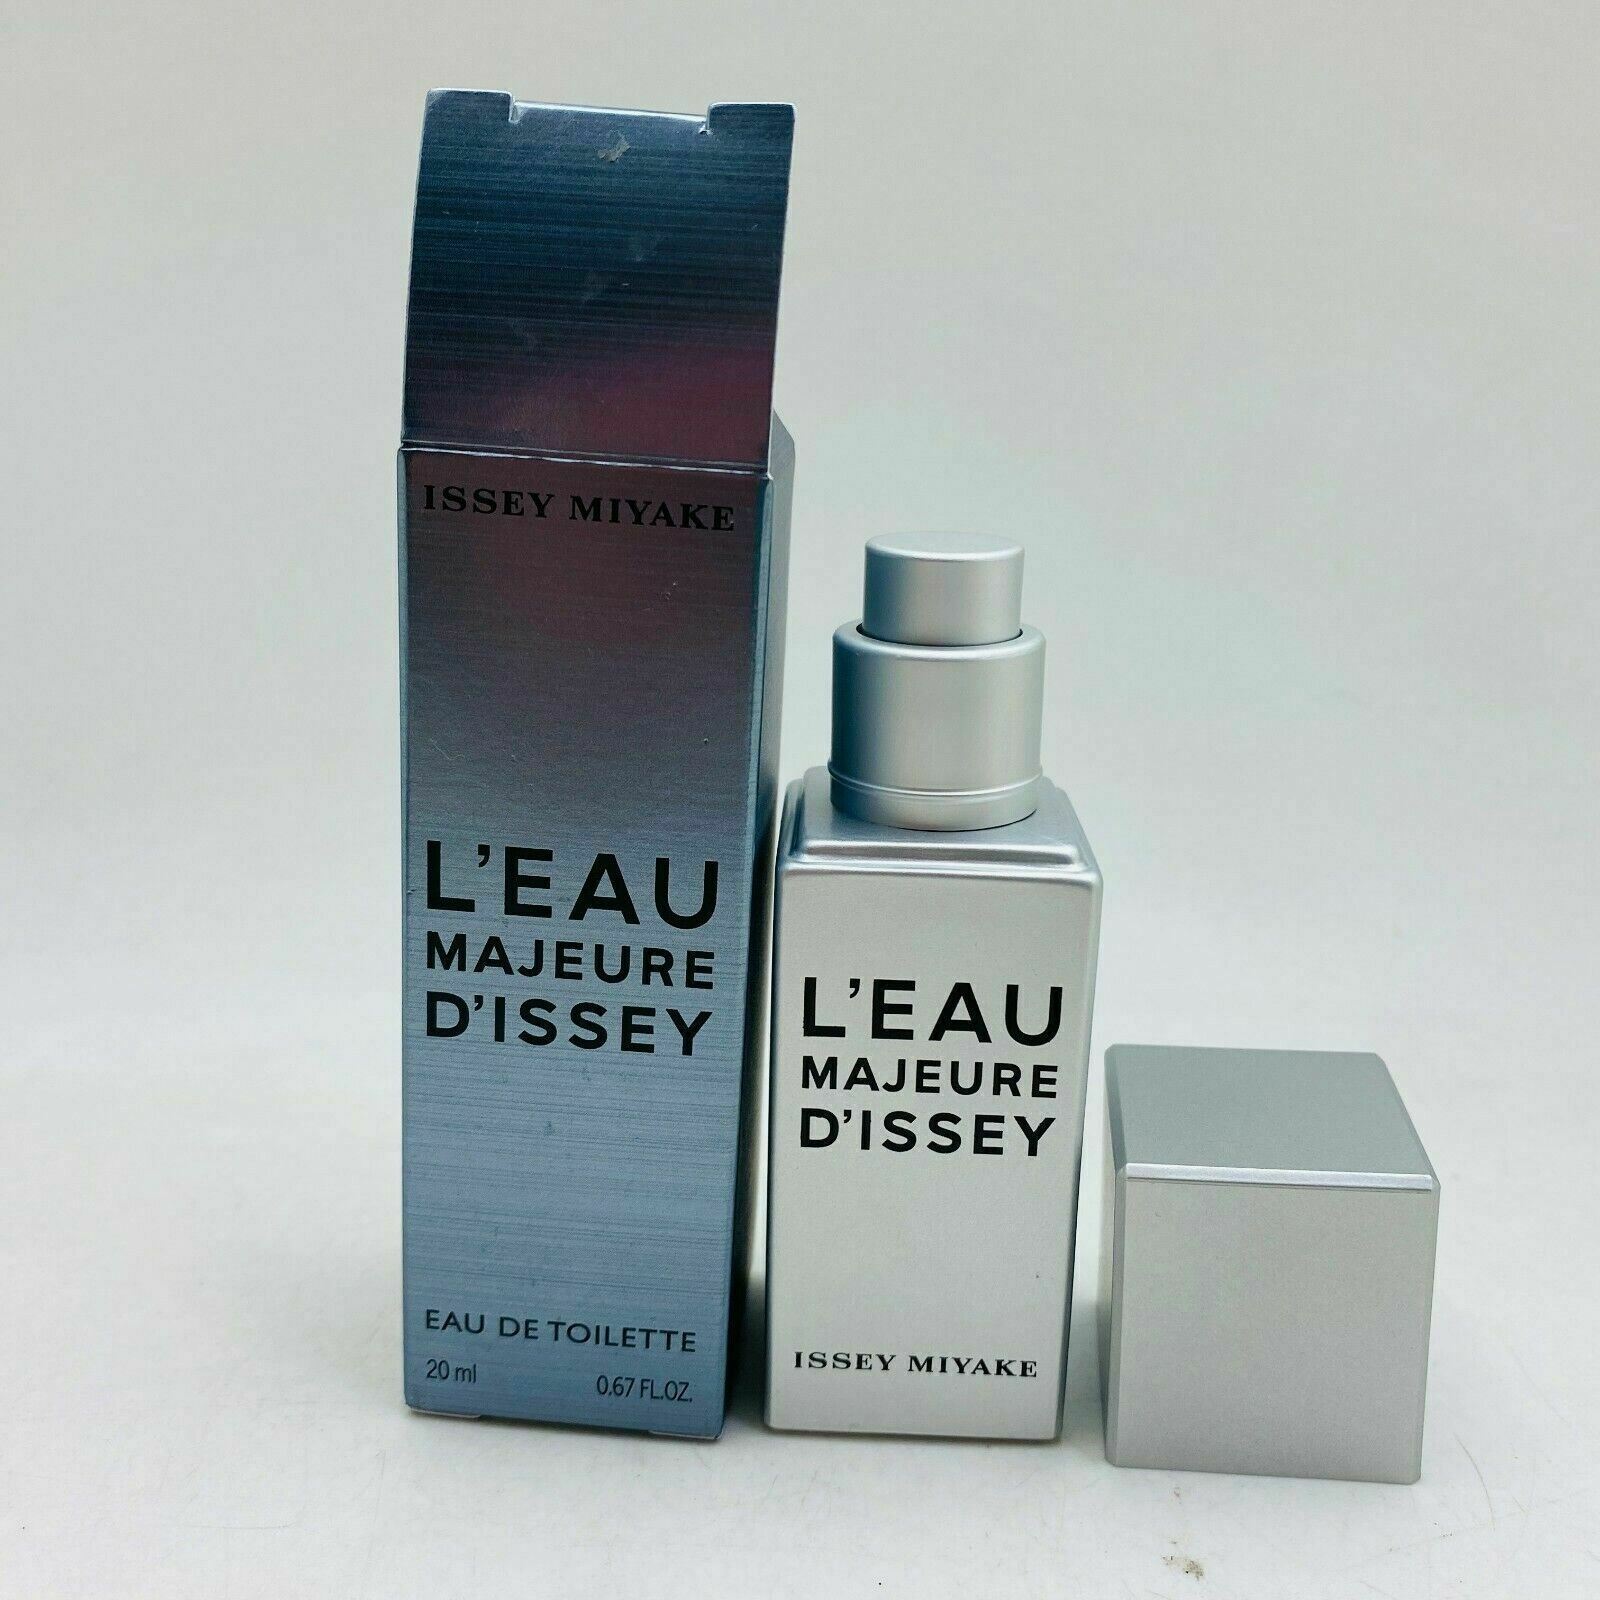 Issey Miyake L'Eau Majeure d'Issey edt 20ml Miniature